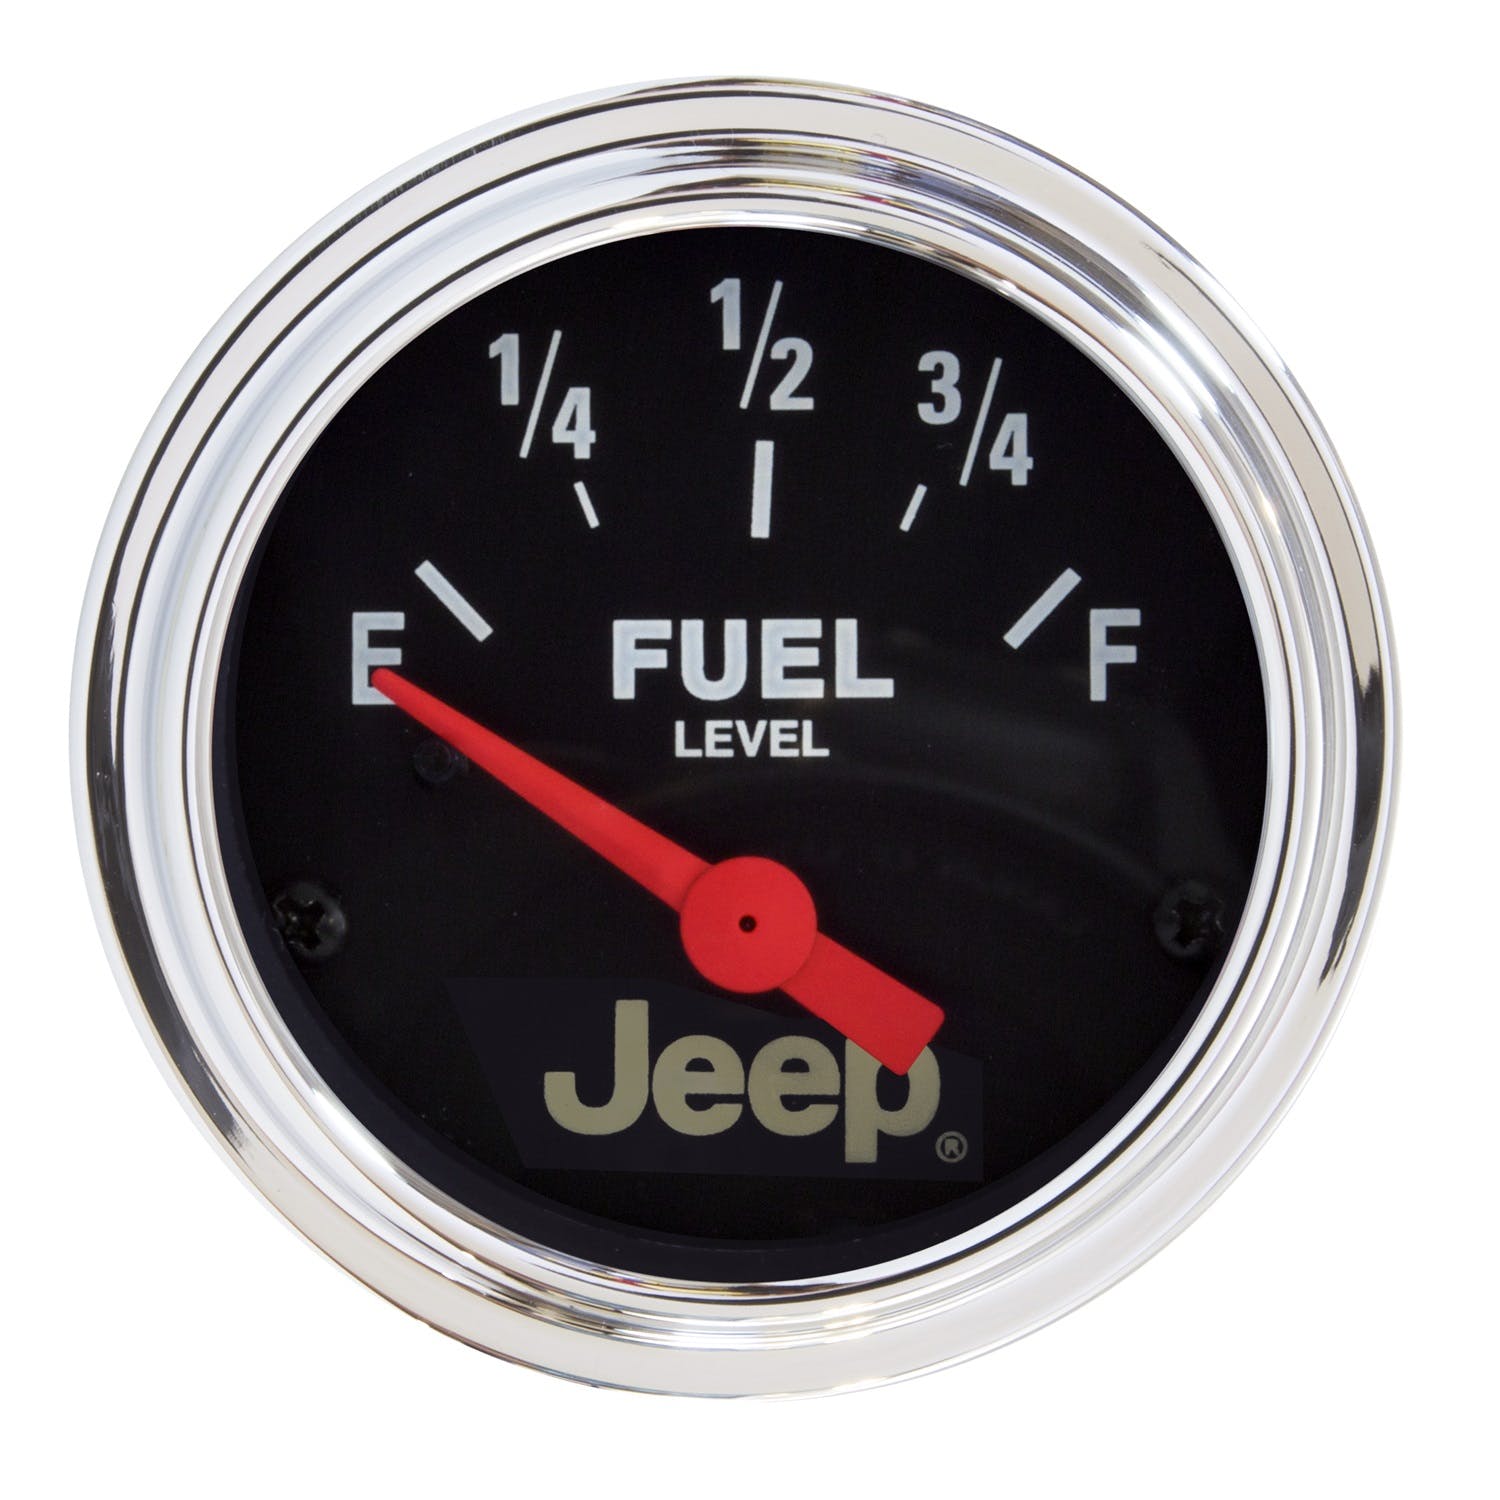 AutoMeter Products 880428 2-1/16 73 E / 8-12 F Fuel Level Gauge (like 2515)